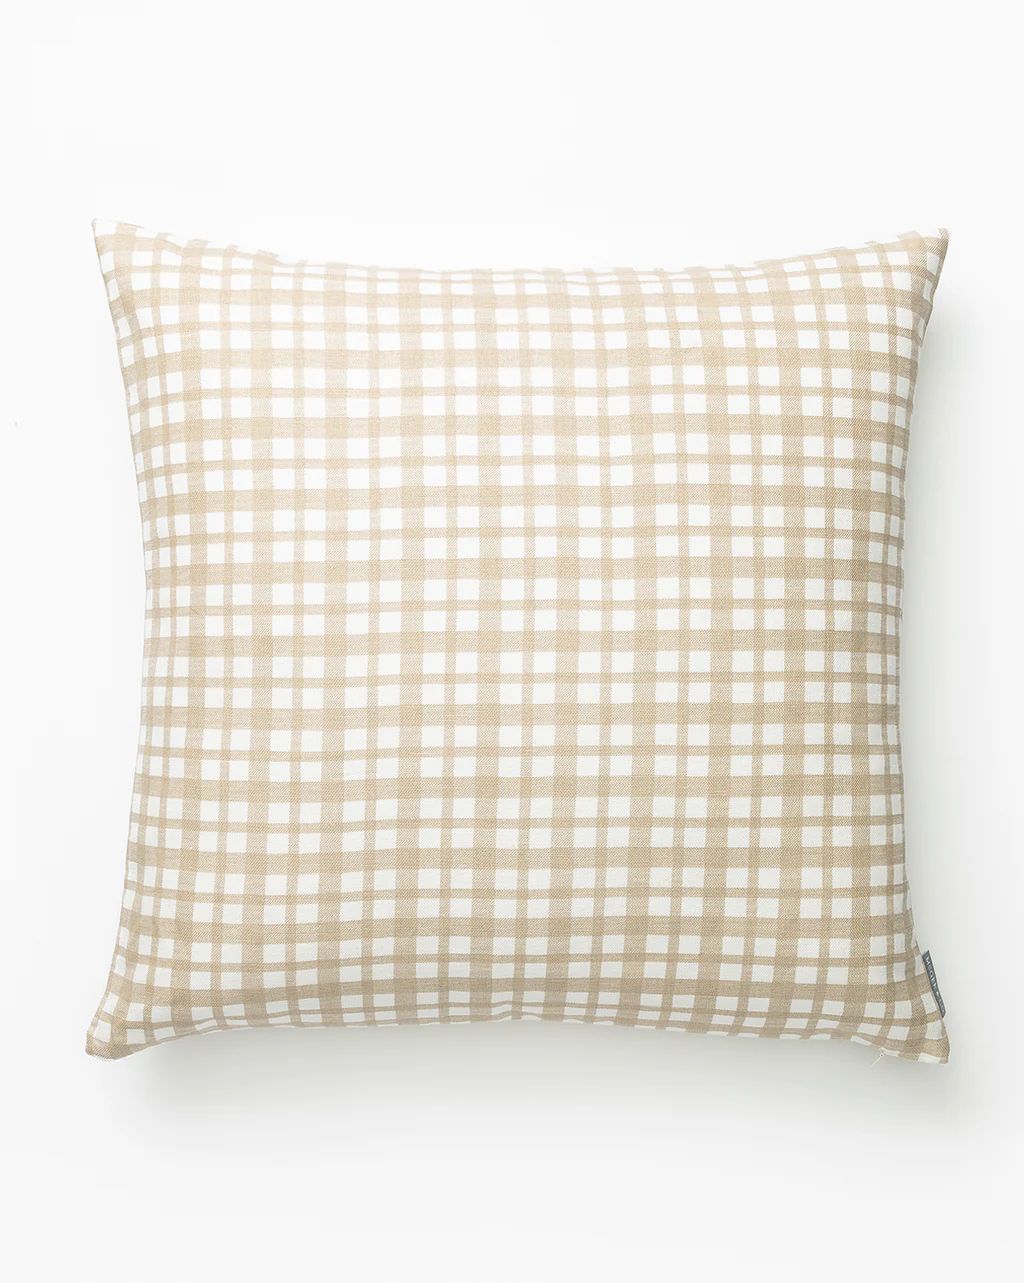 Edison Gingham Pillow Cover | McGee & Co. (US)